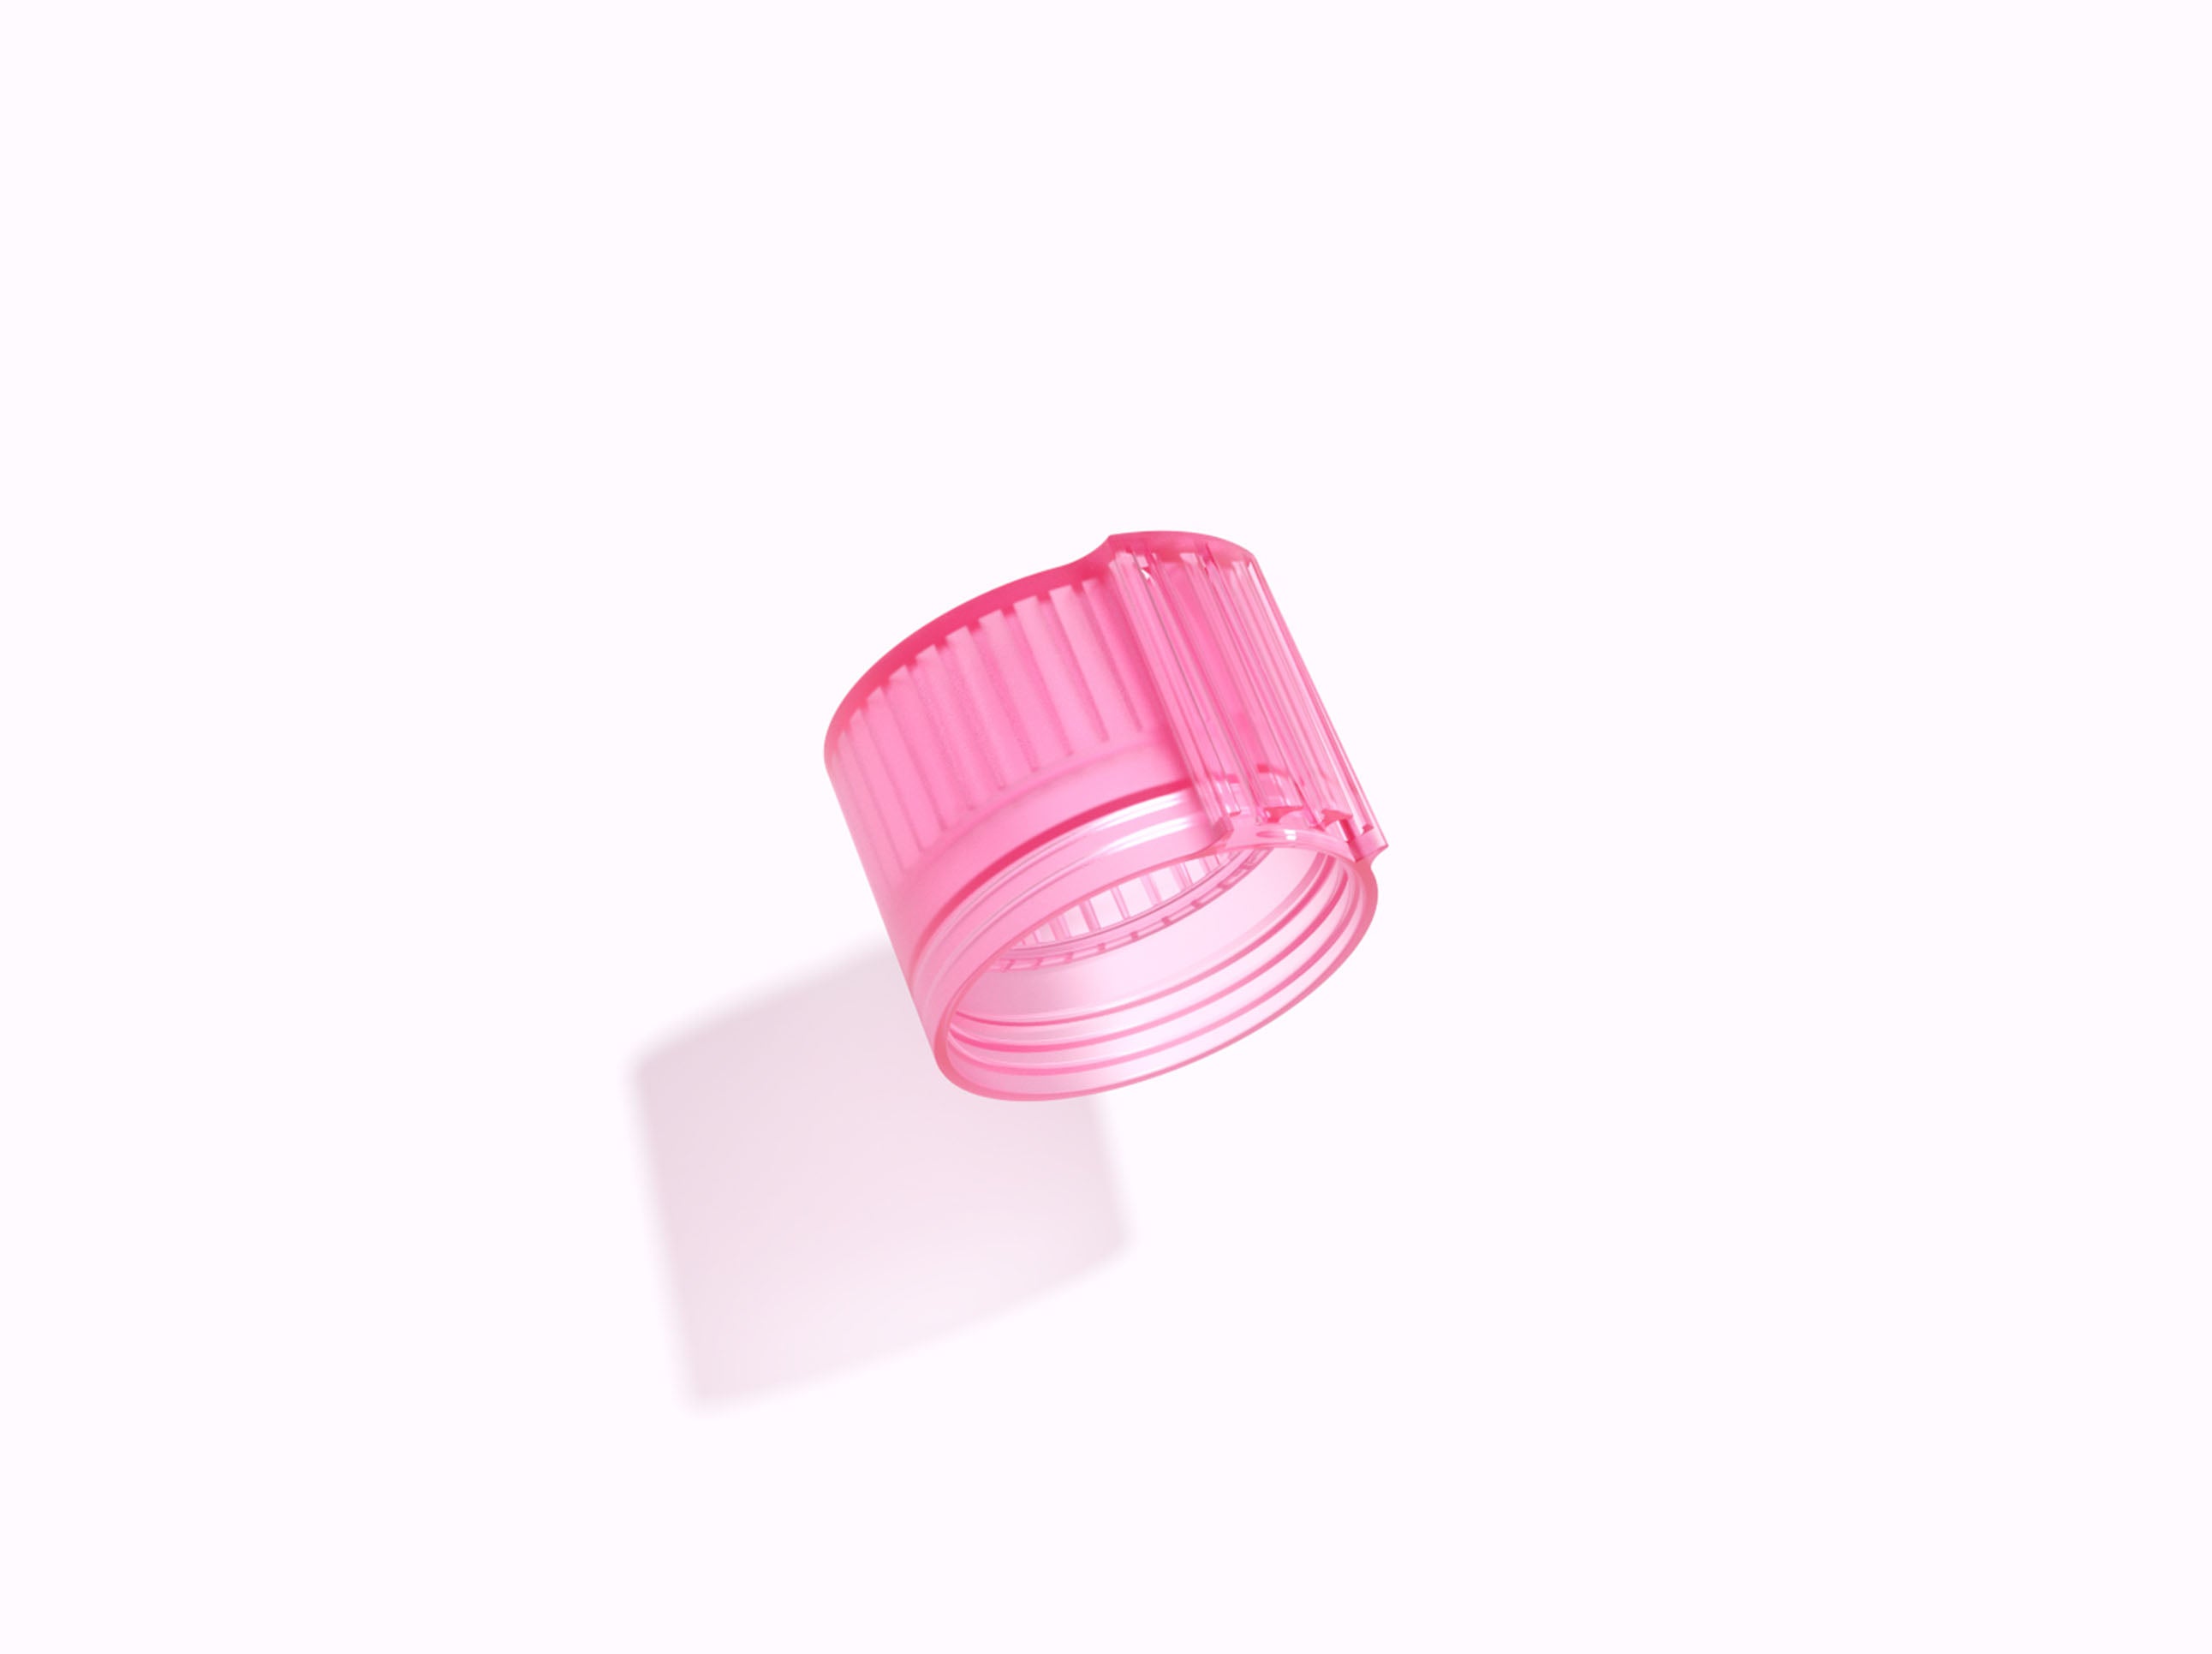 https://cdn.shopify.com/s/files/1/0595/3909/5605/products/AirUP-SparePart-HotPink_Lid.jpg?v=1674581713